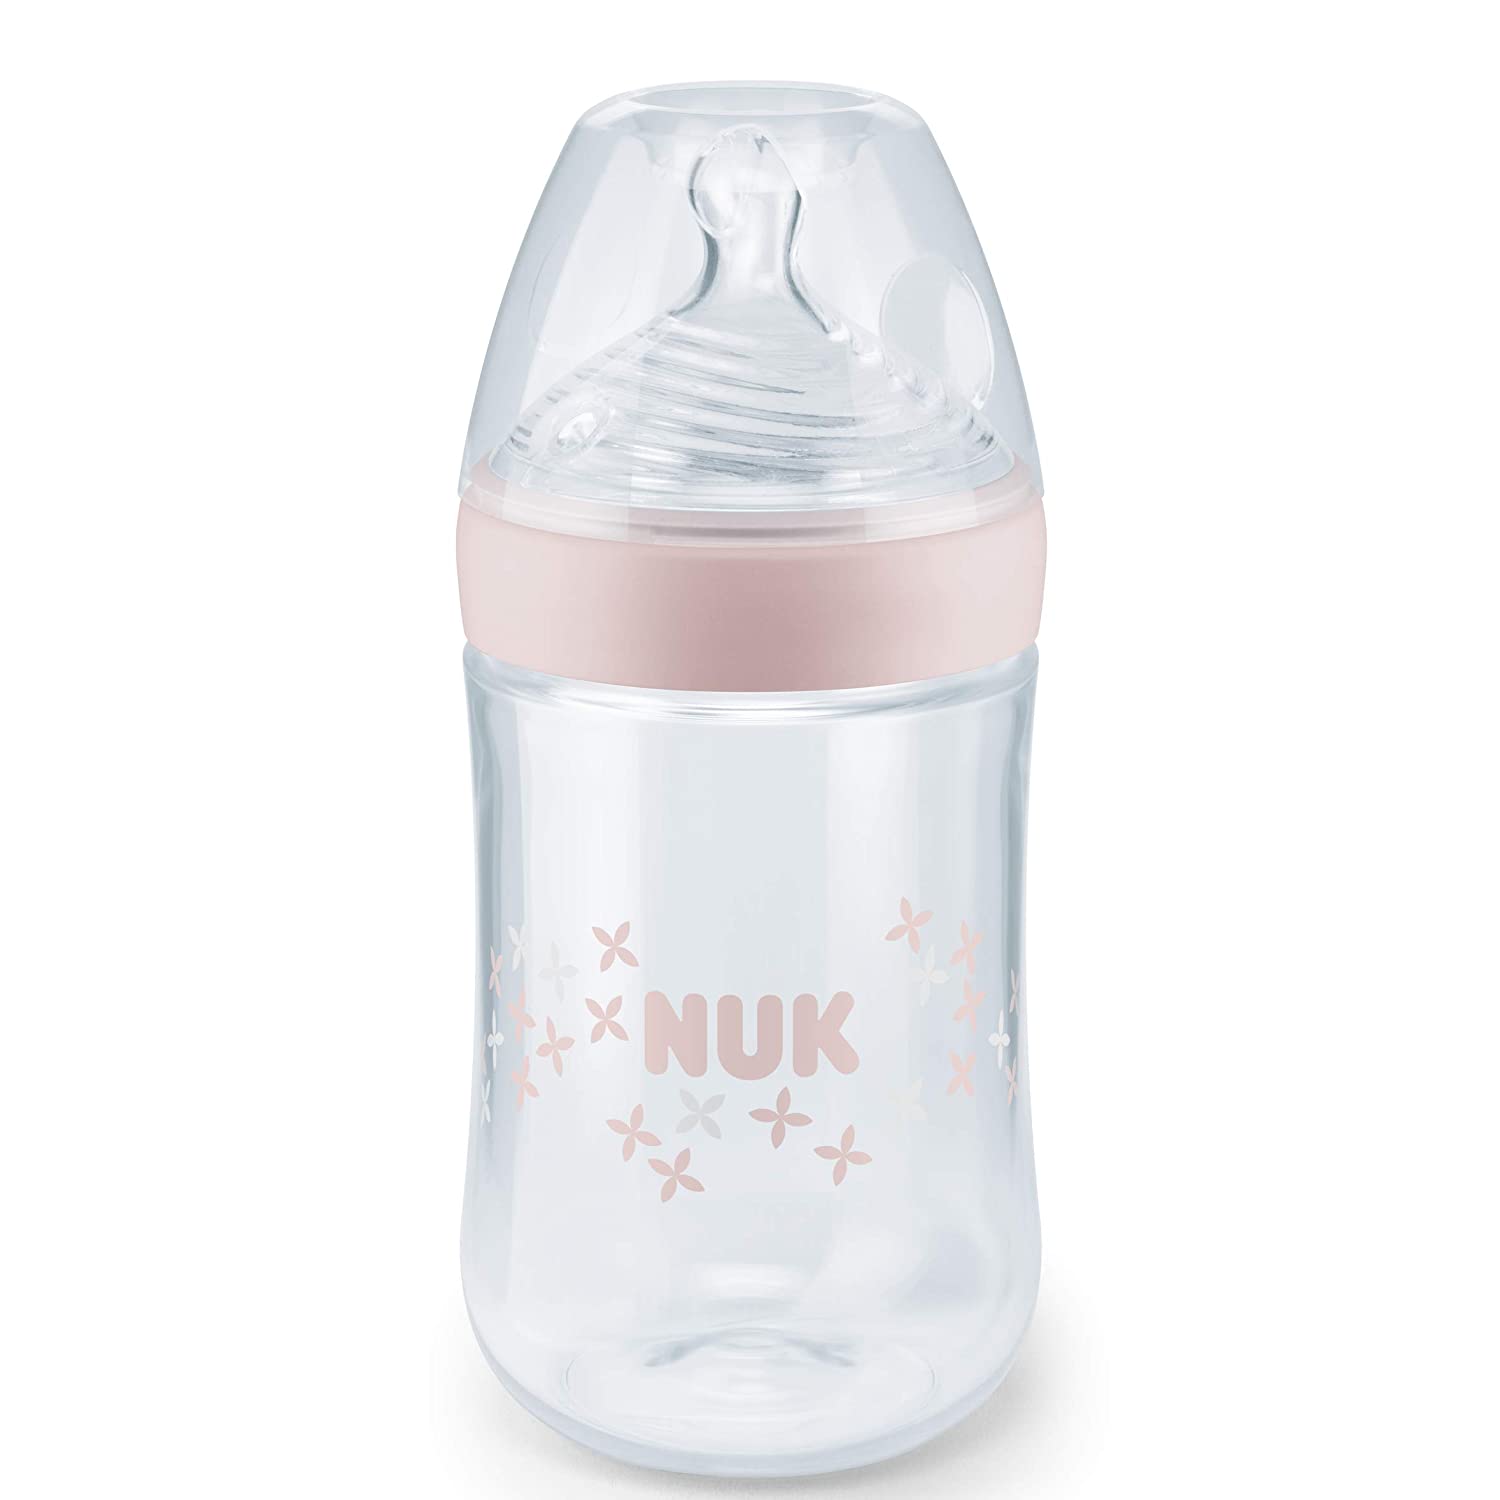 NUK Nature Sense Baby Bottle, 6-18 Months, with Breast-like Silicone Teat, 260 ml